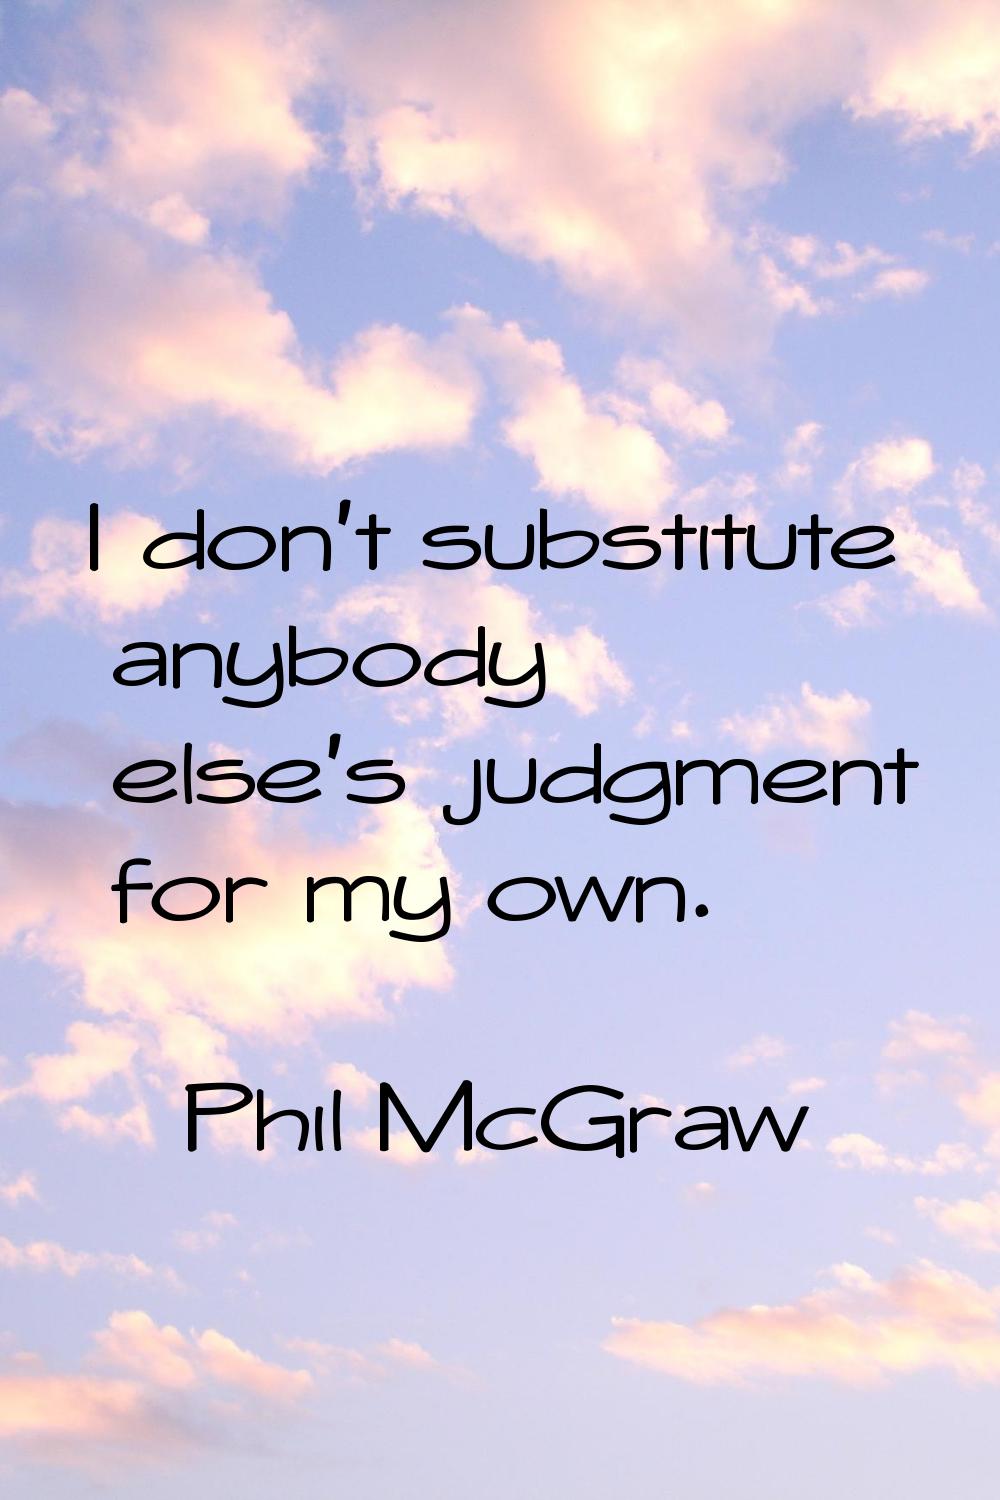 I don't substitute anybody else's judgment for my own.